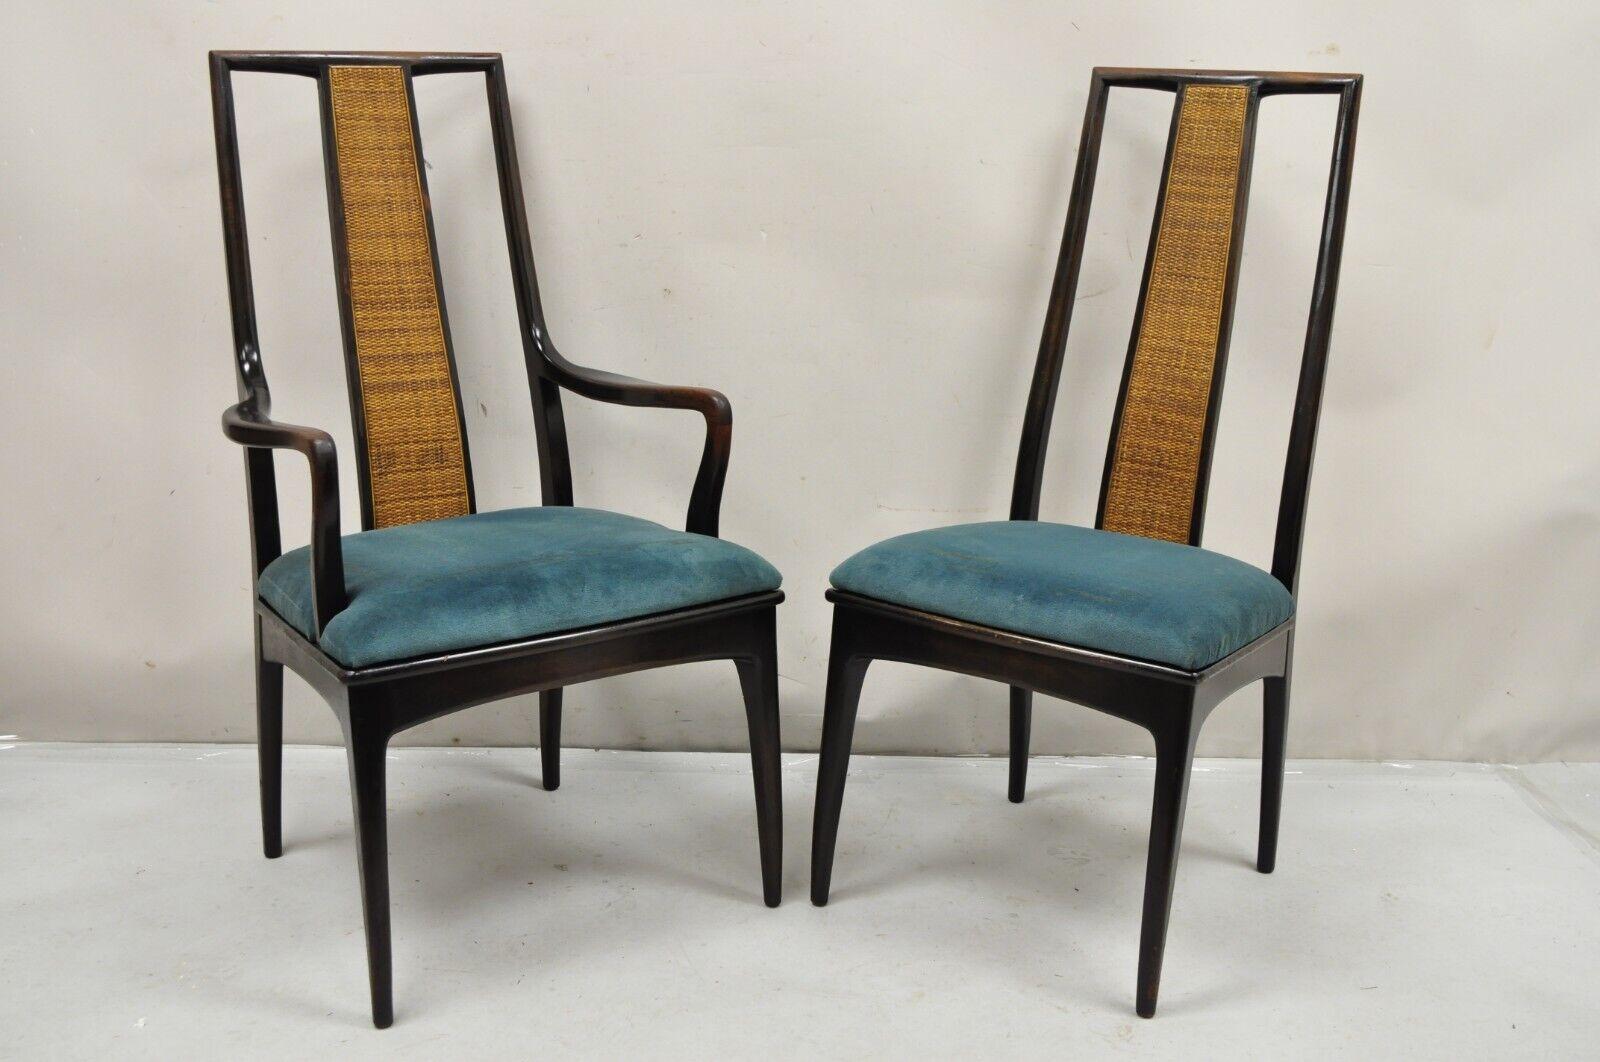 Vintage John Stuart Cane Back Mid Century Modern Asian Inspired Dining Chairs - Set of 10. Item features 2 armchairs, 8 side chairs, cane panel backs, sculpted solid wood frame, original label, very rare set of 10. Circa Mid 20th